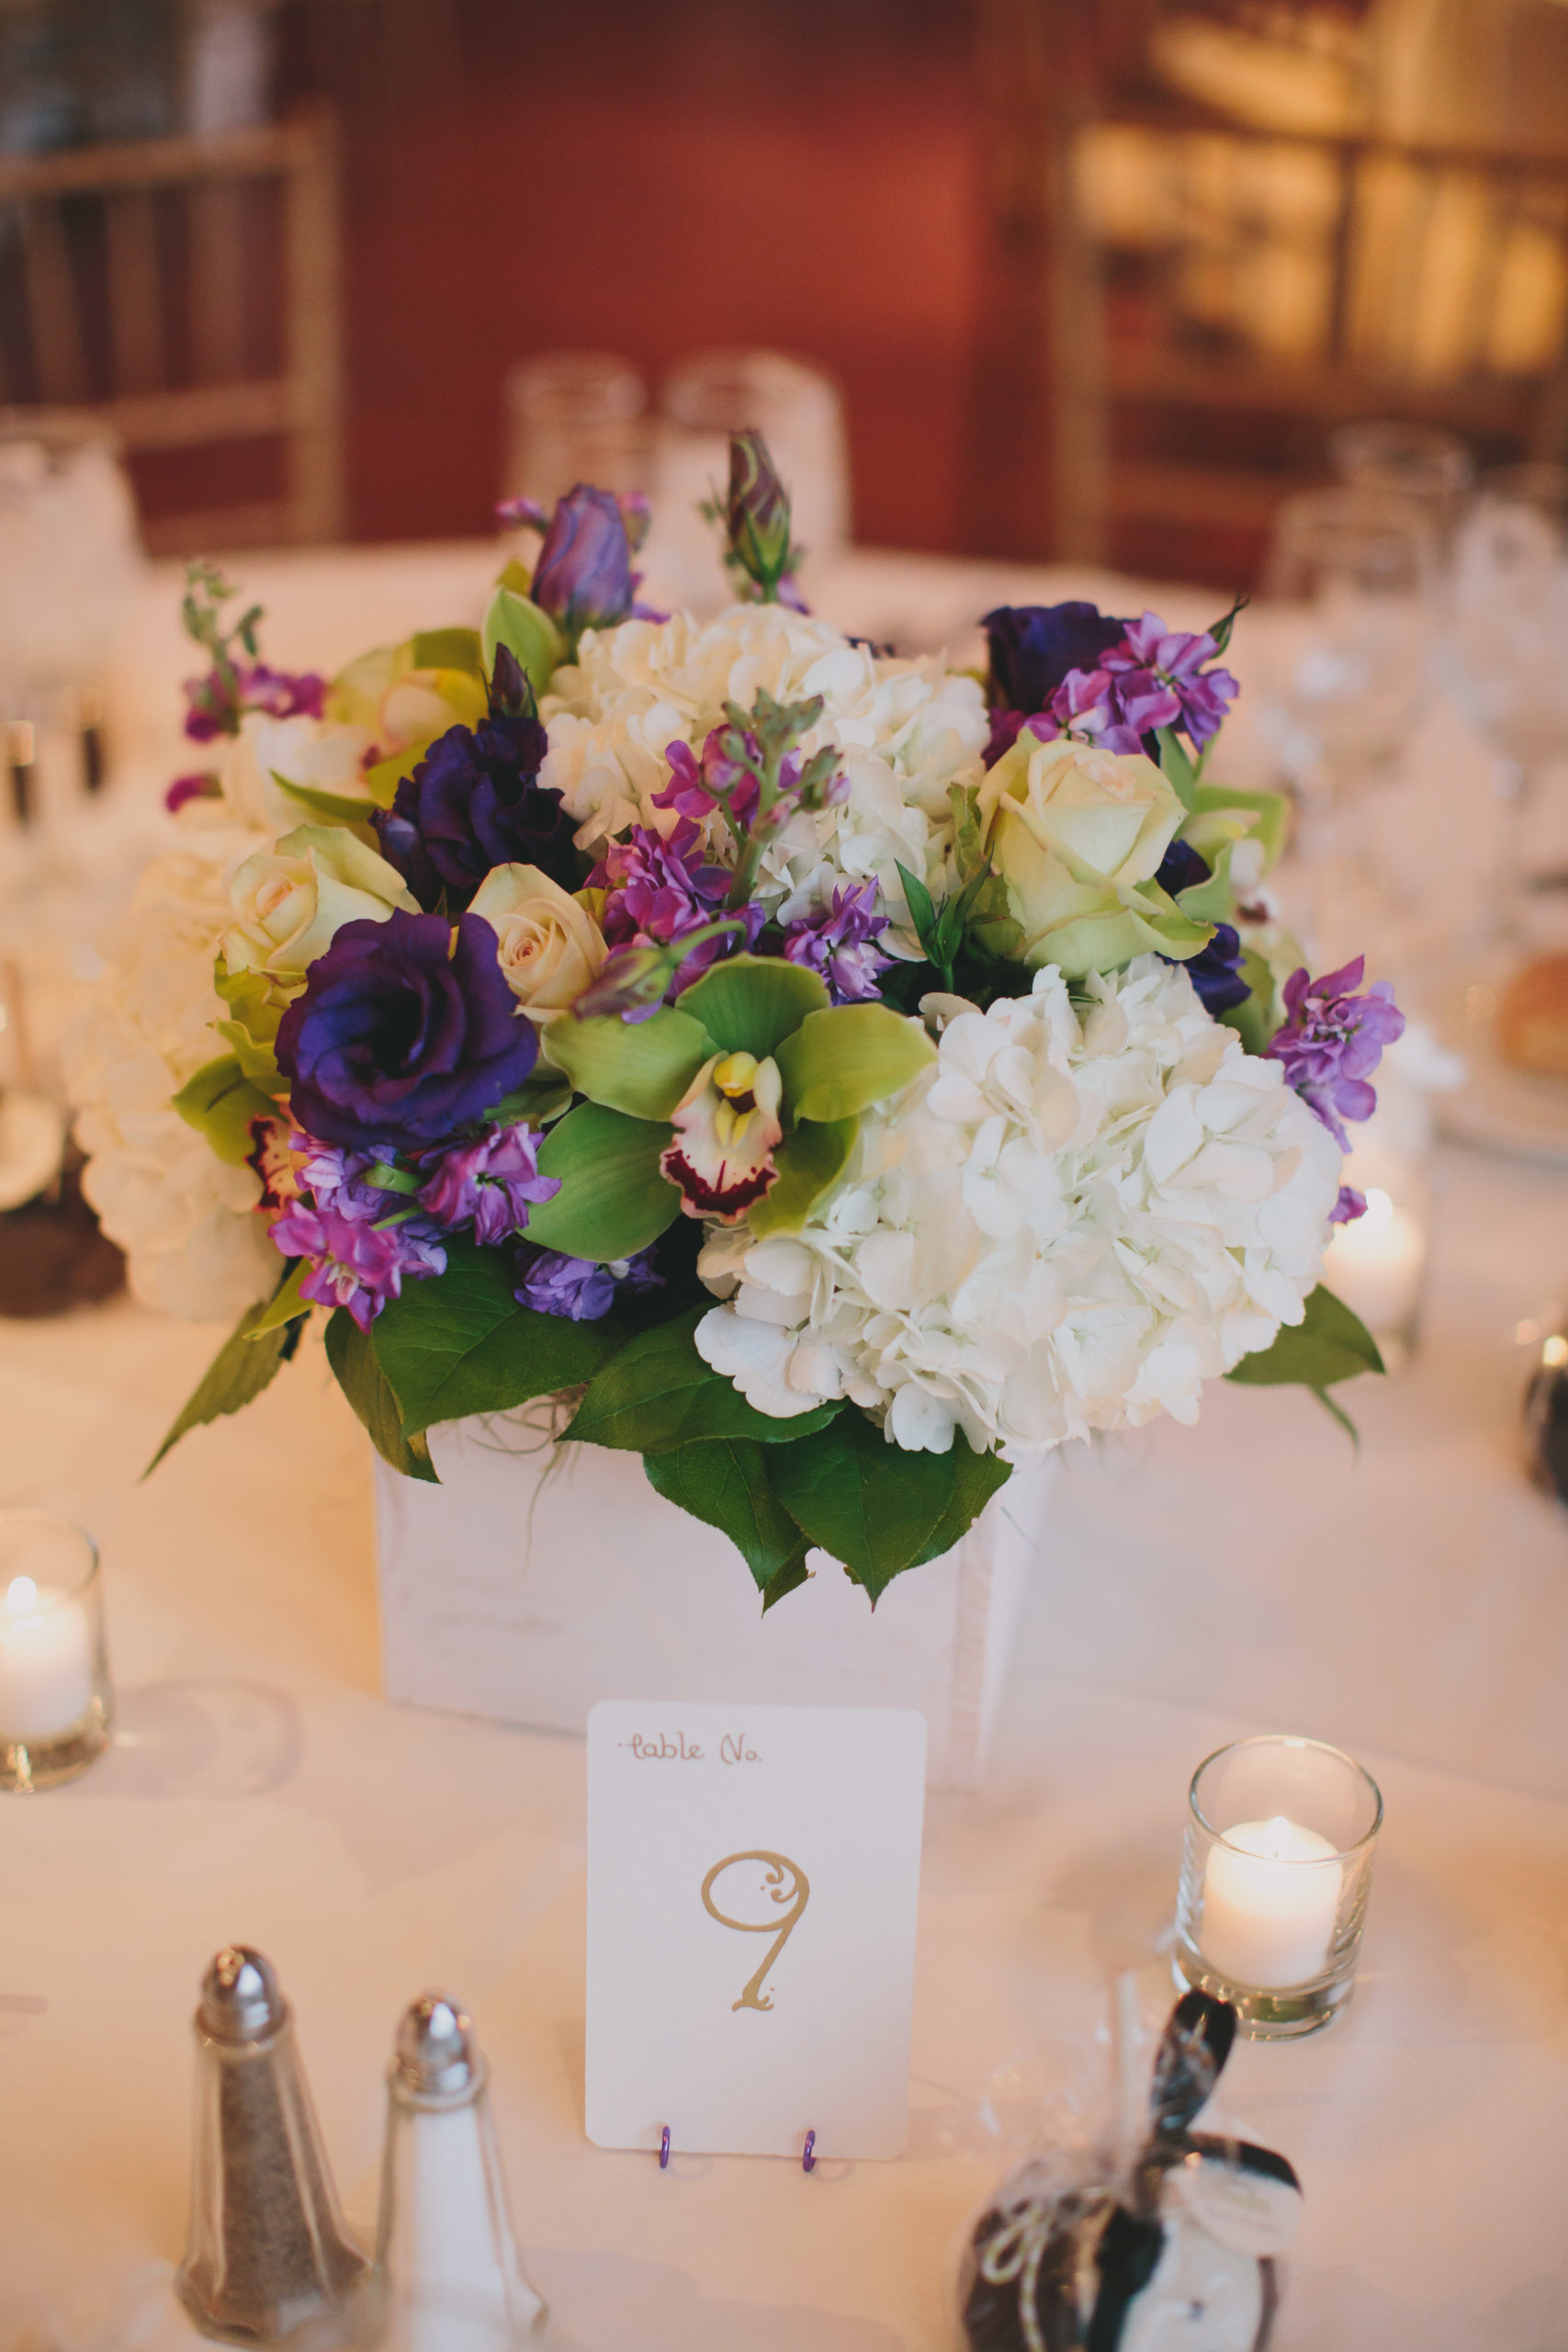 Stunning Centerpieces and Arrangements for Your Wedding Reception